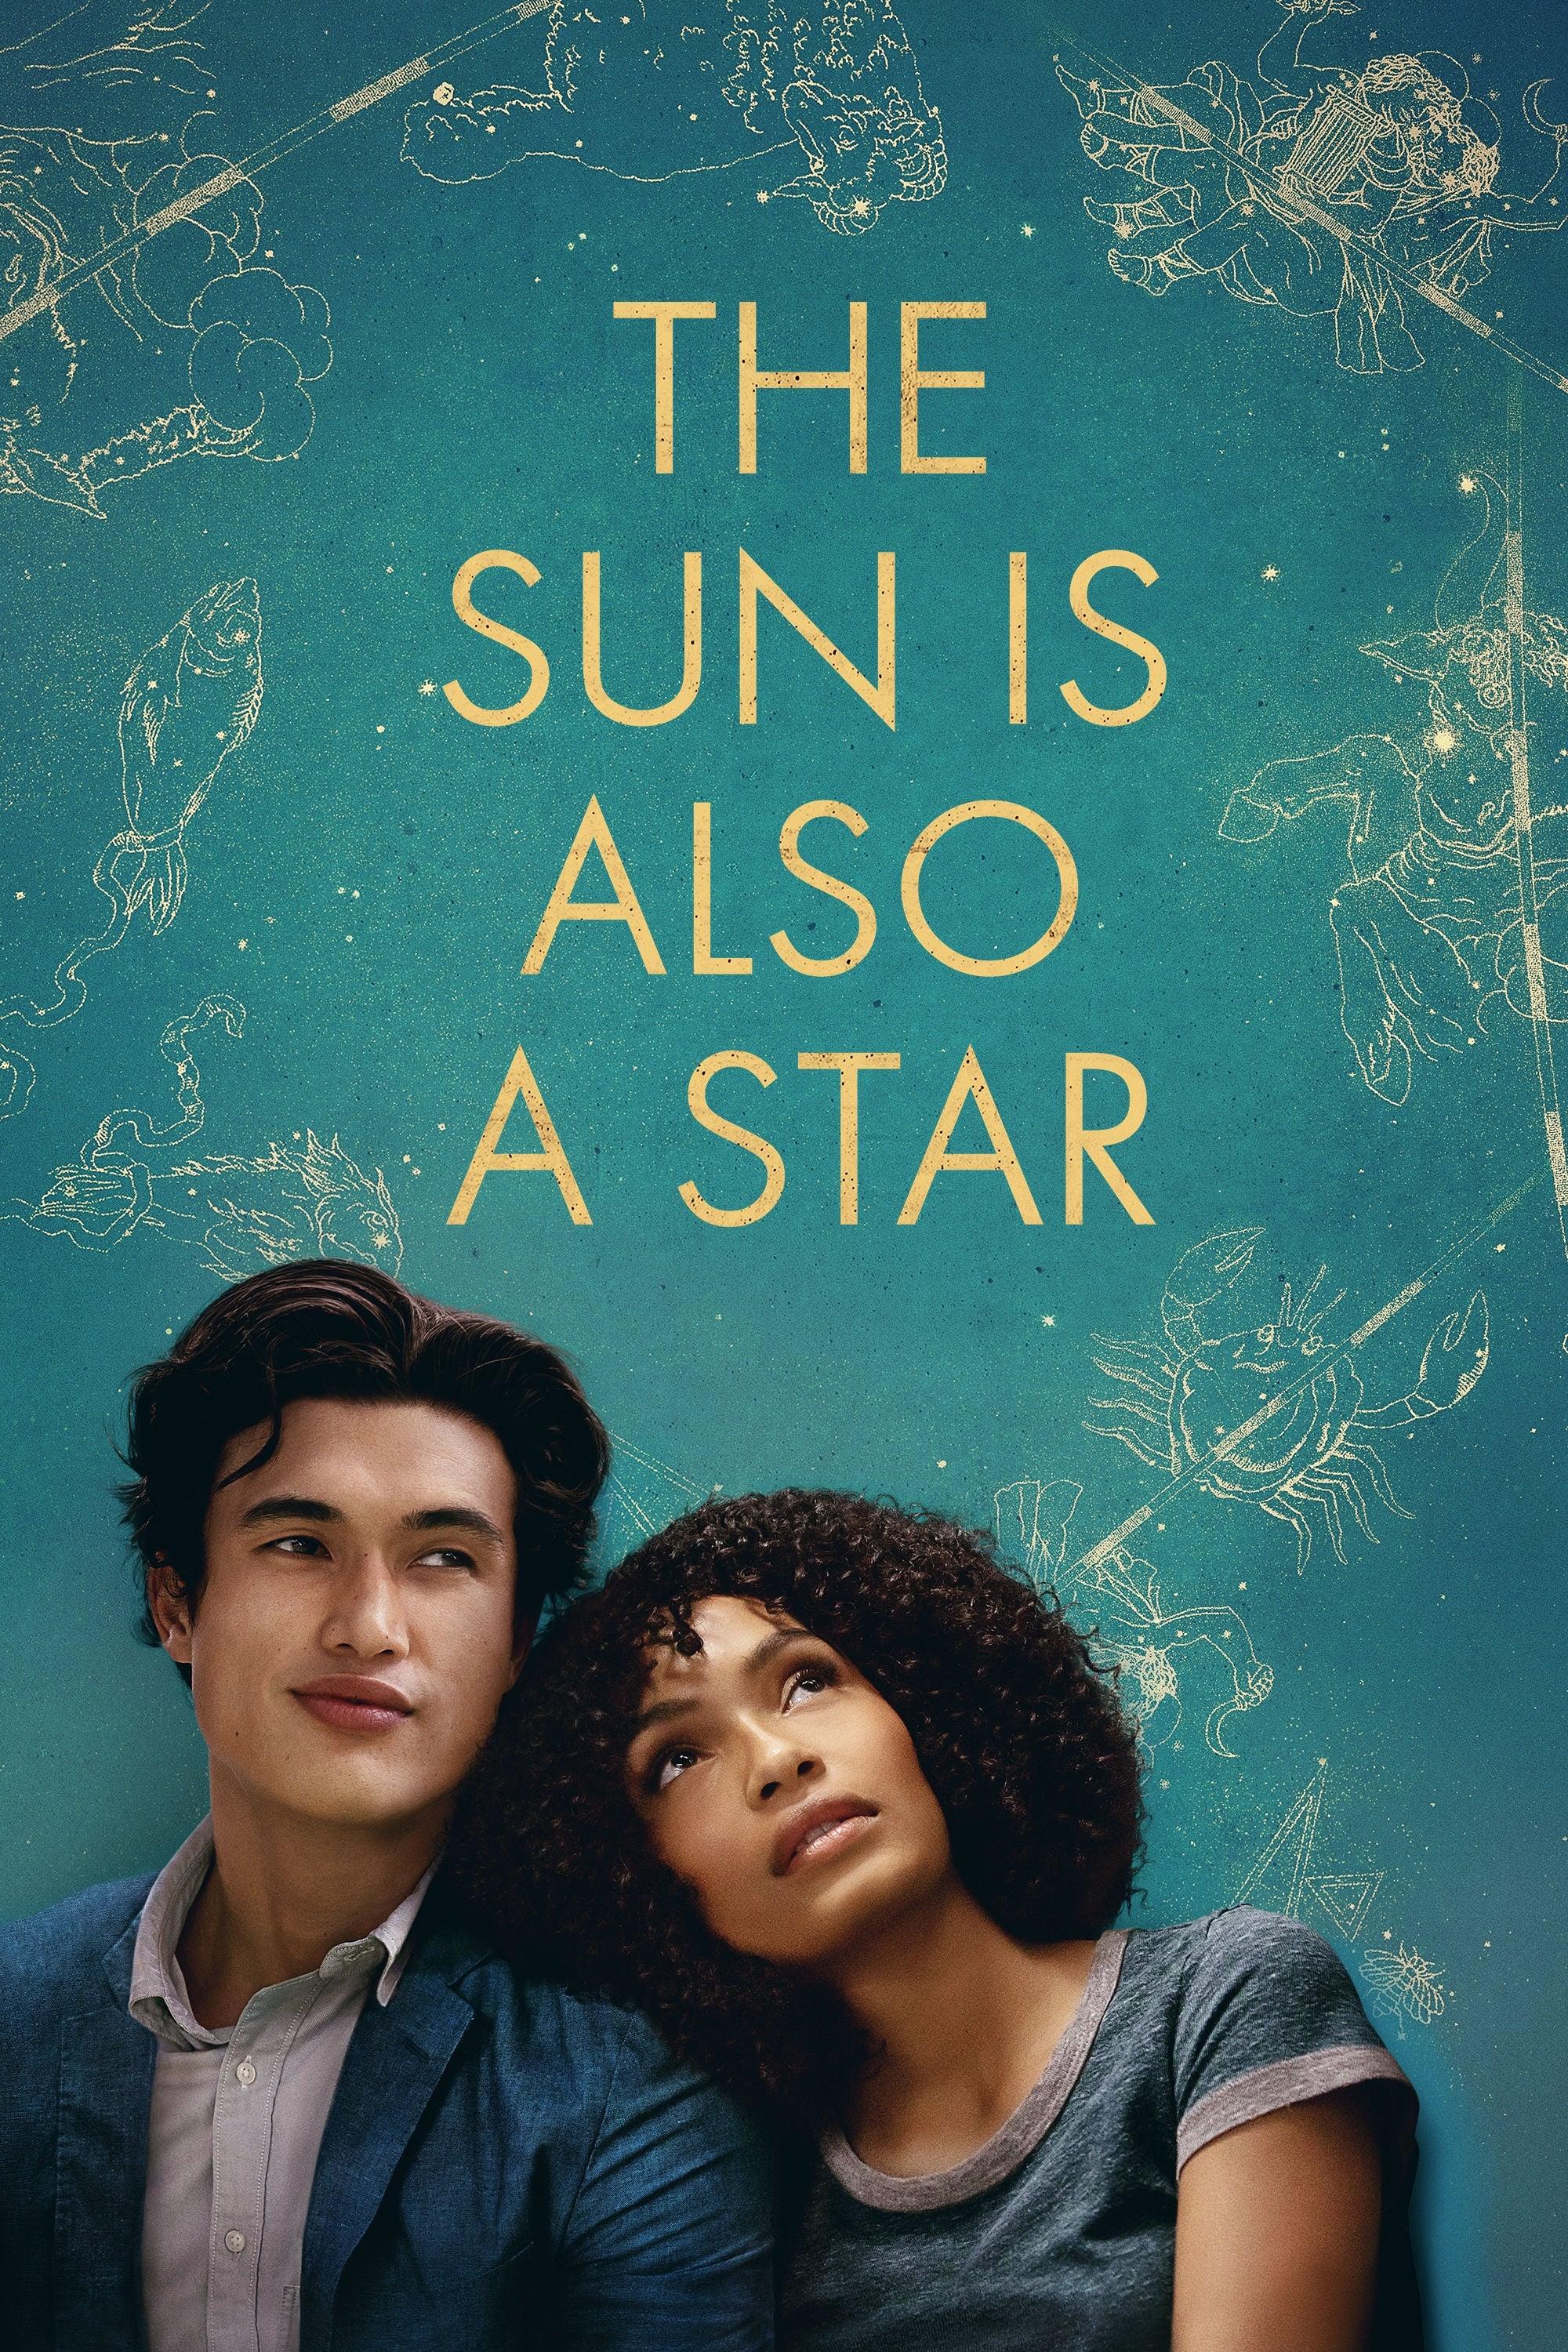 The Sun Is Also a Star poster